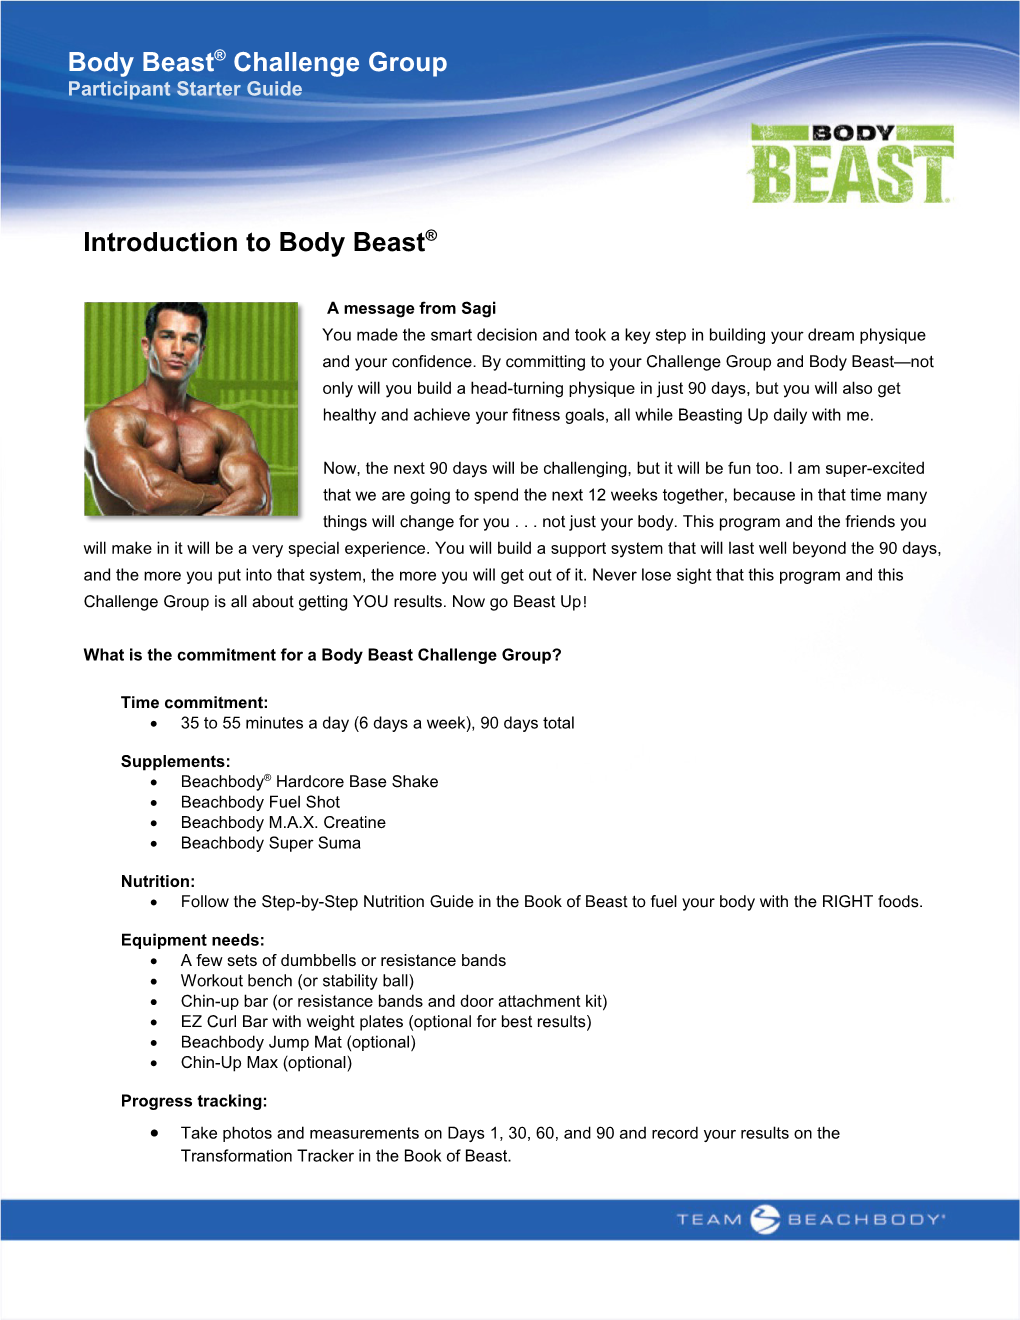 What Is the Commitment for a Body Beast Challenge Group?